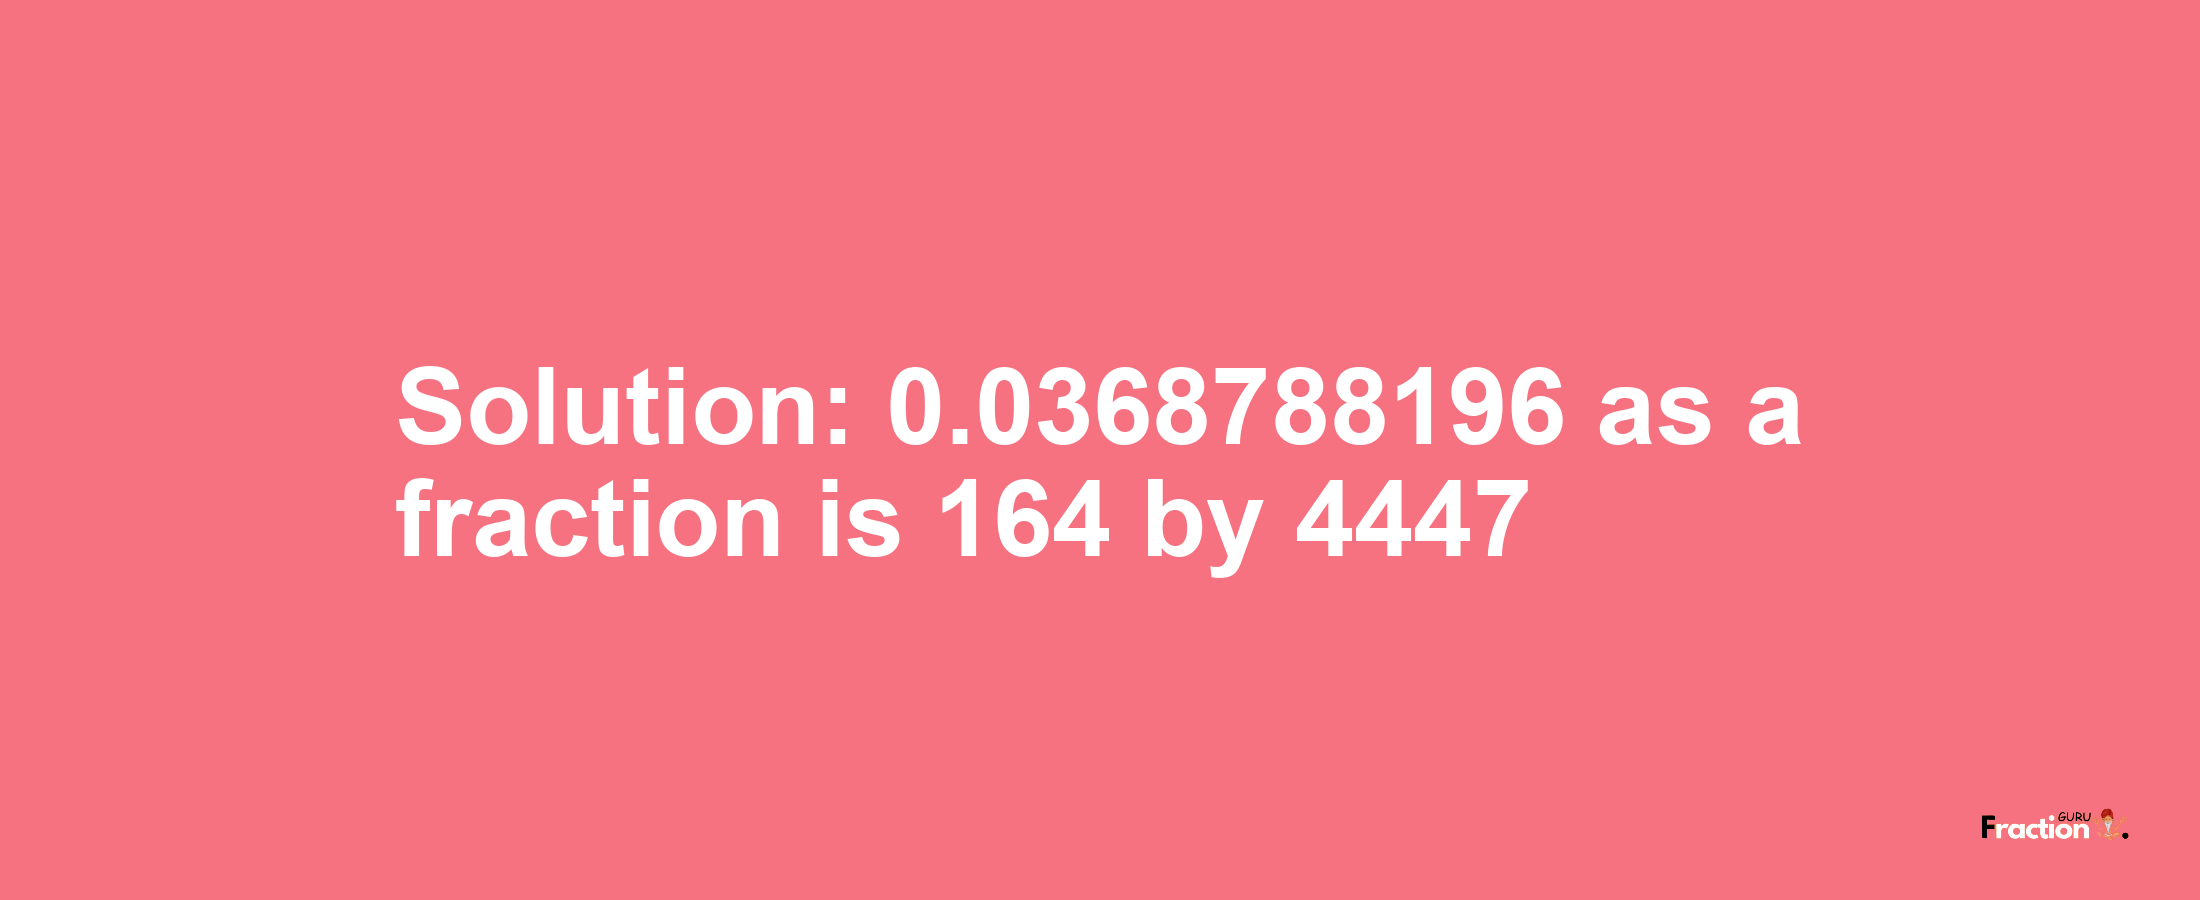 Solution:0.0368788196 as a fraction is 164/4447